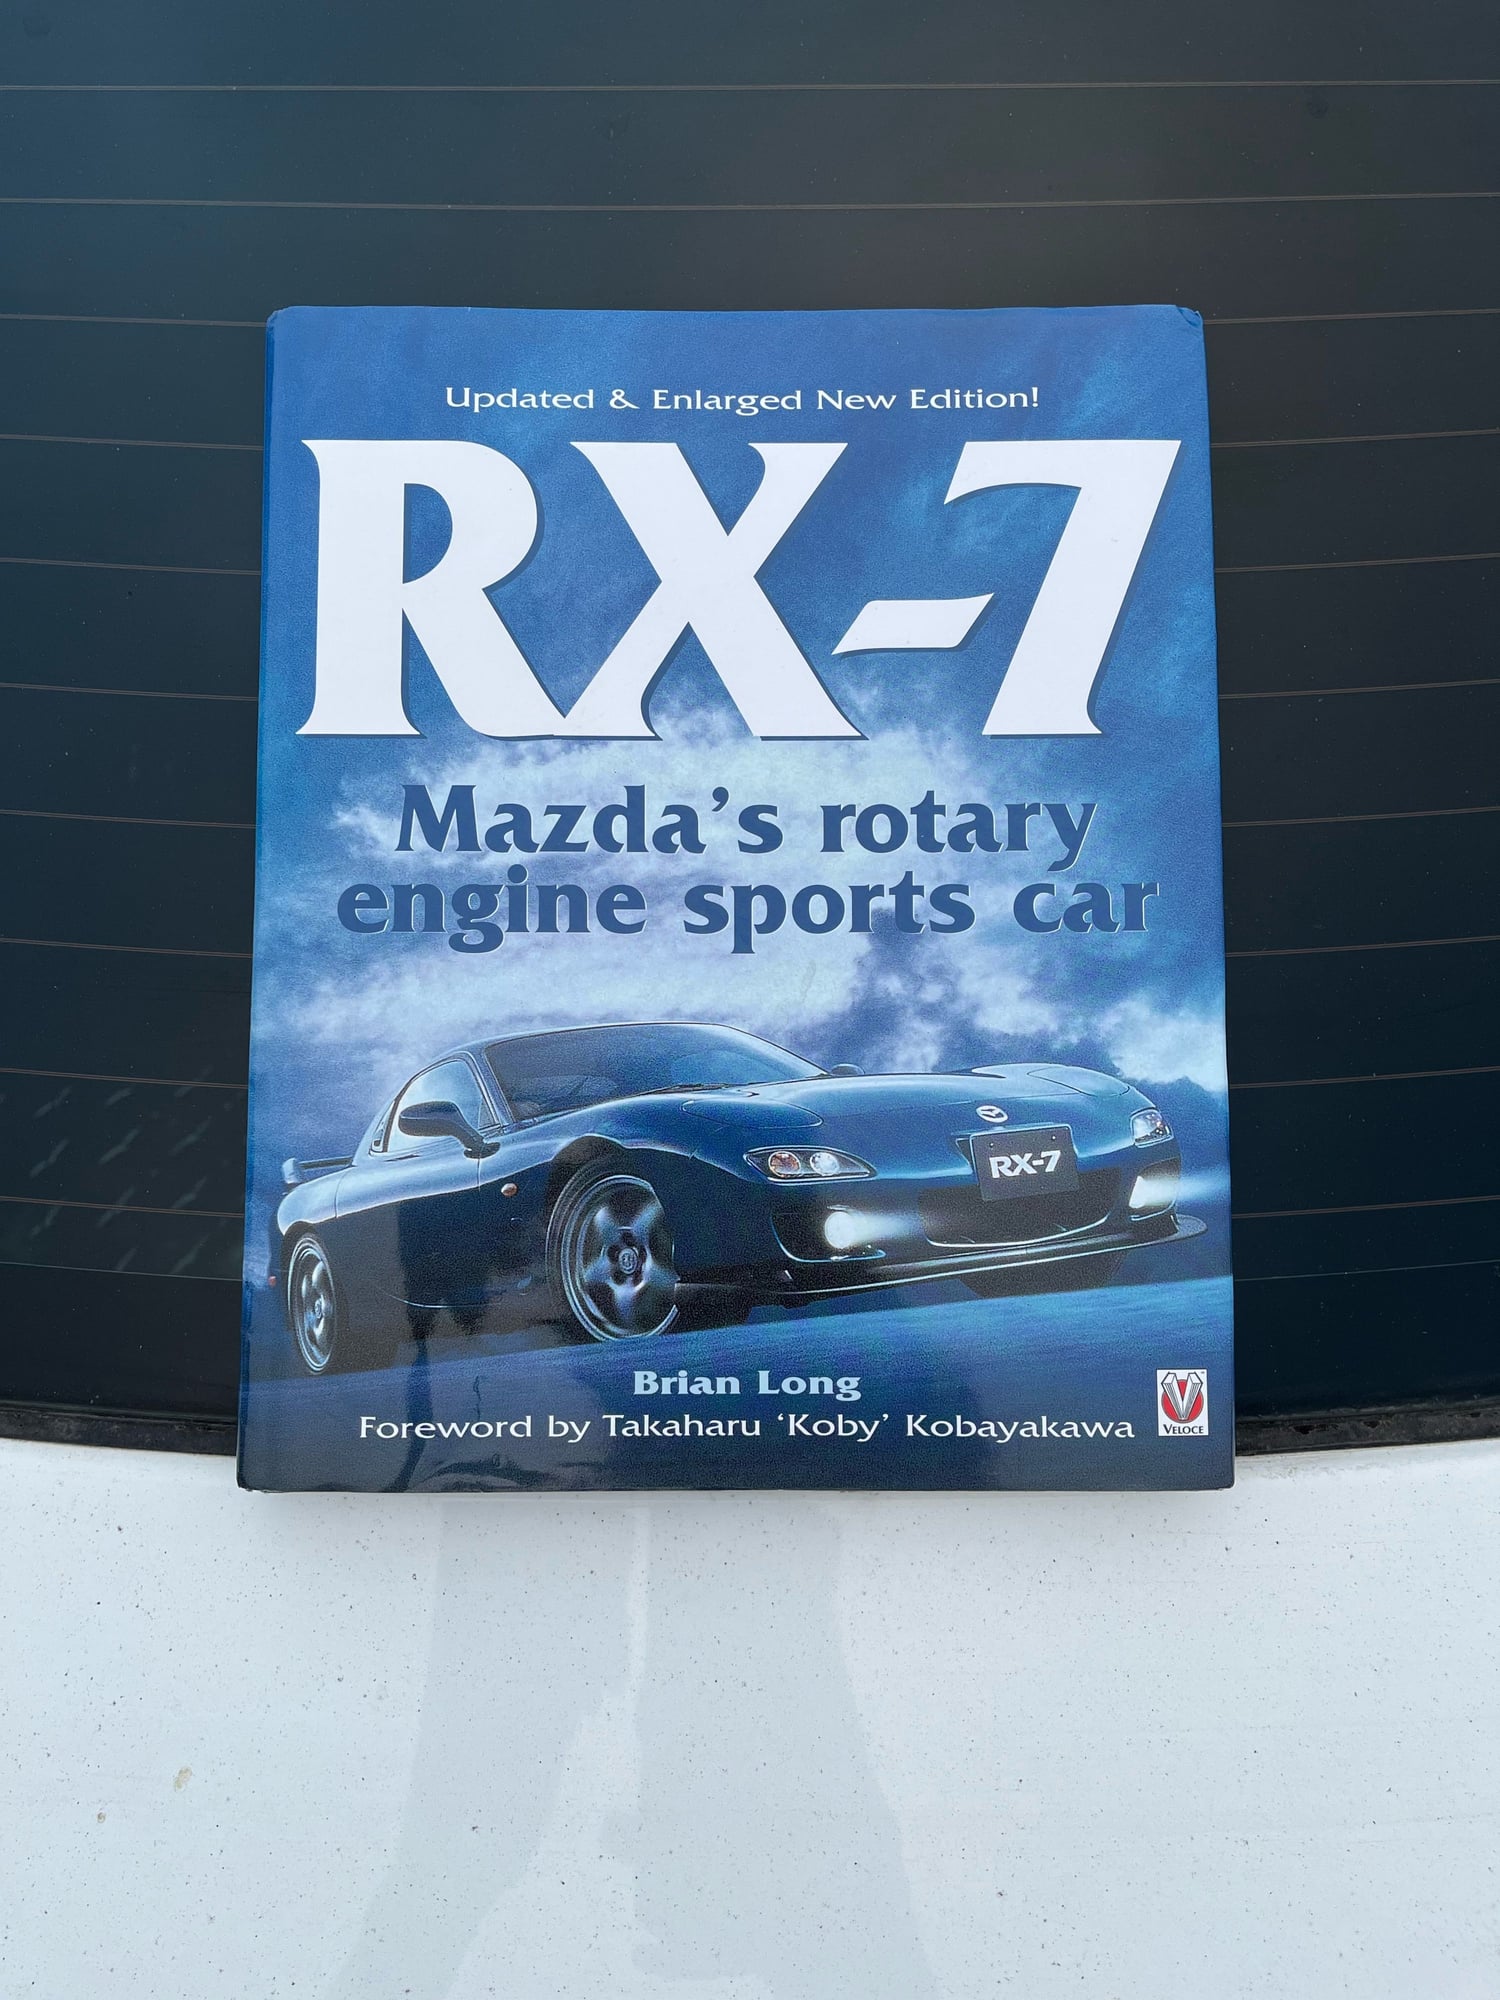 Accessories - 1995 Mazda RX-7 Owner’s Manual & Pouch - Used - 1995 Mazda RX-7 - San Marcos, CA 92069, United States